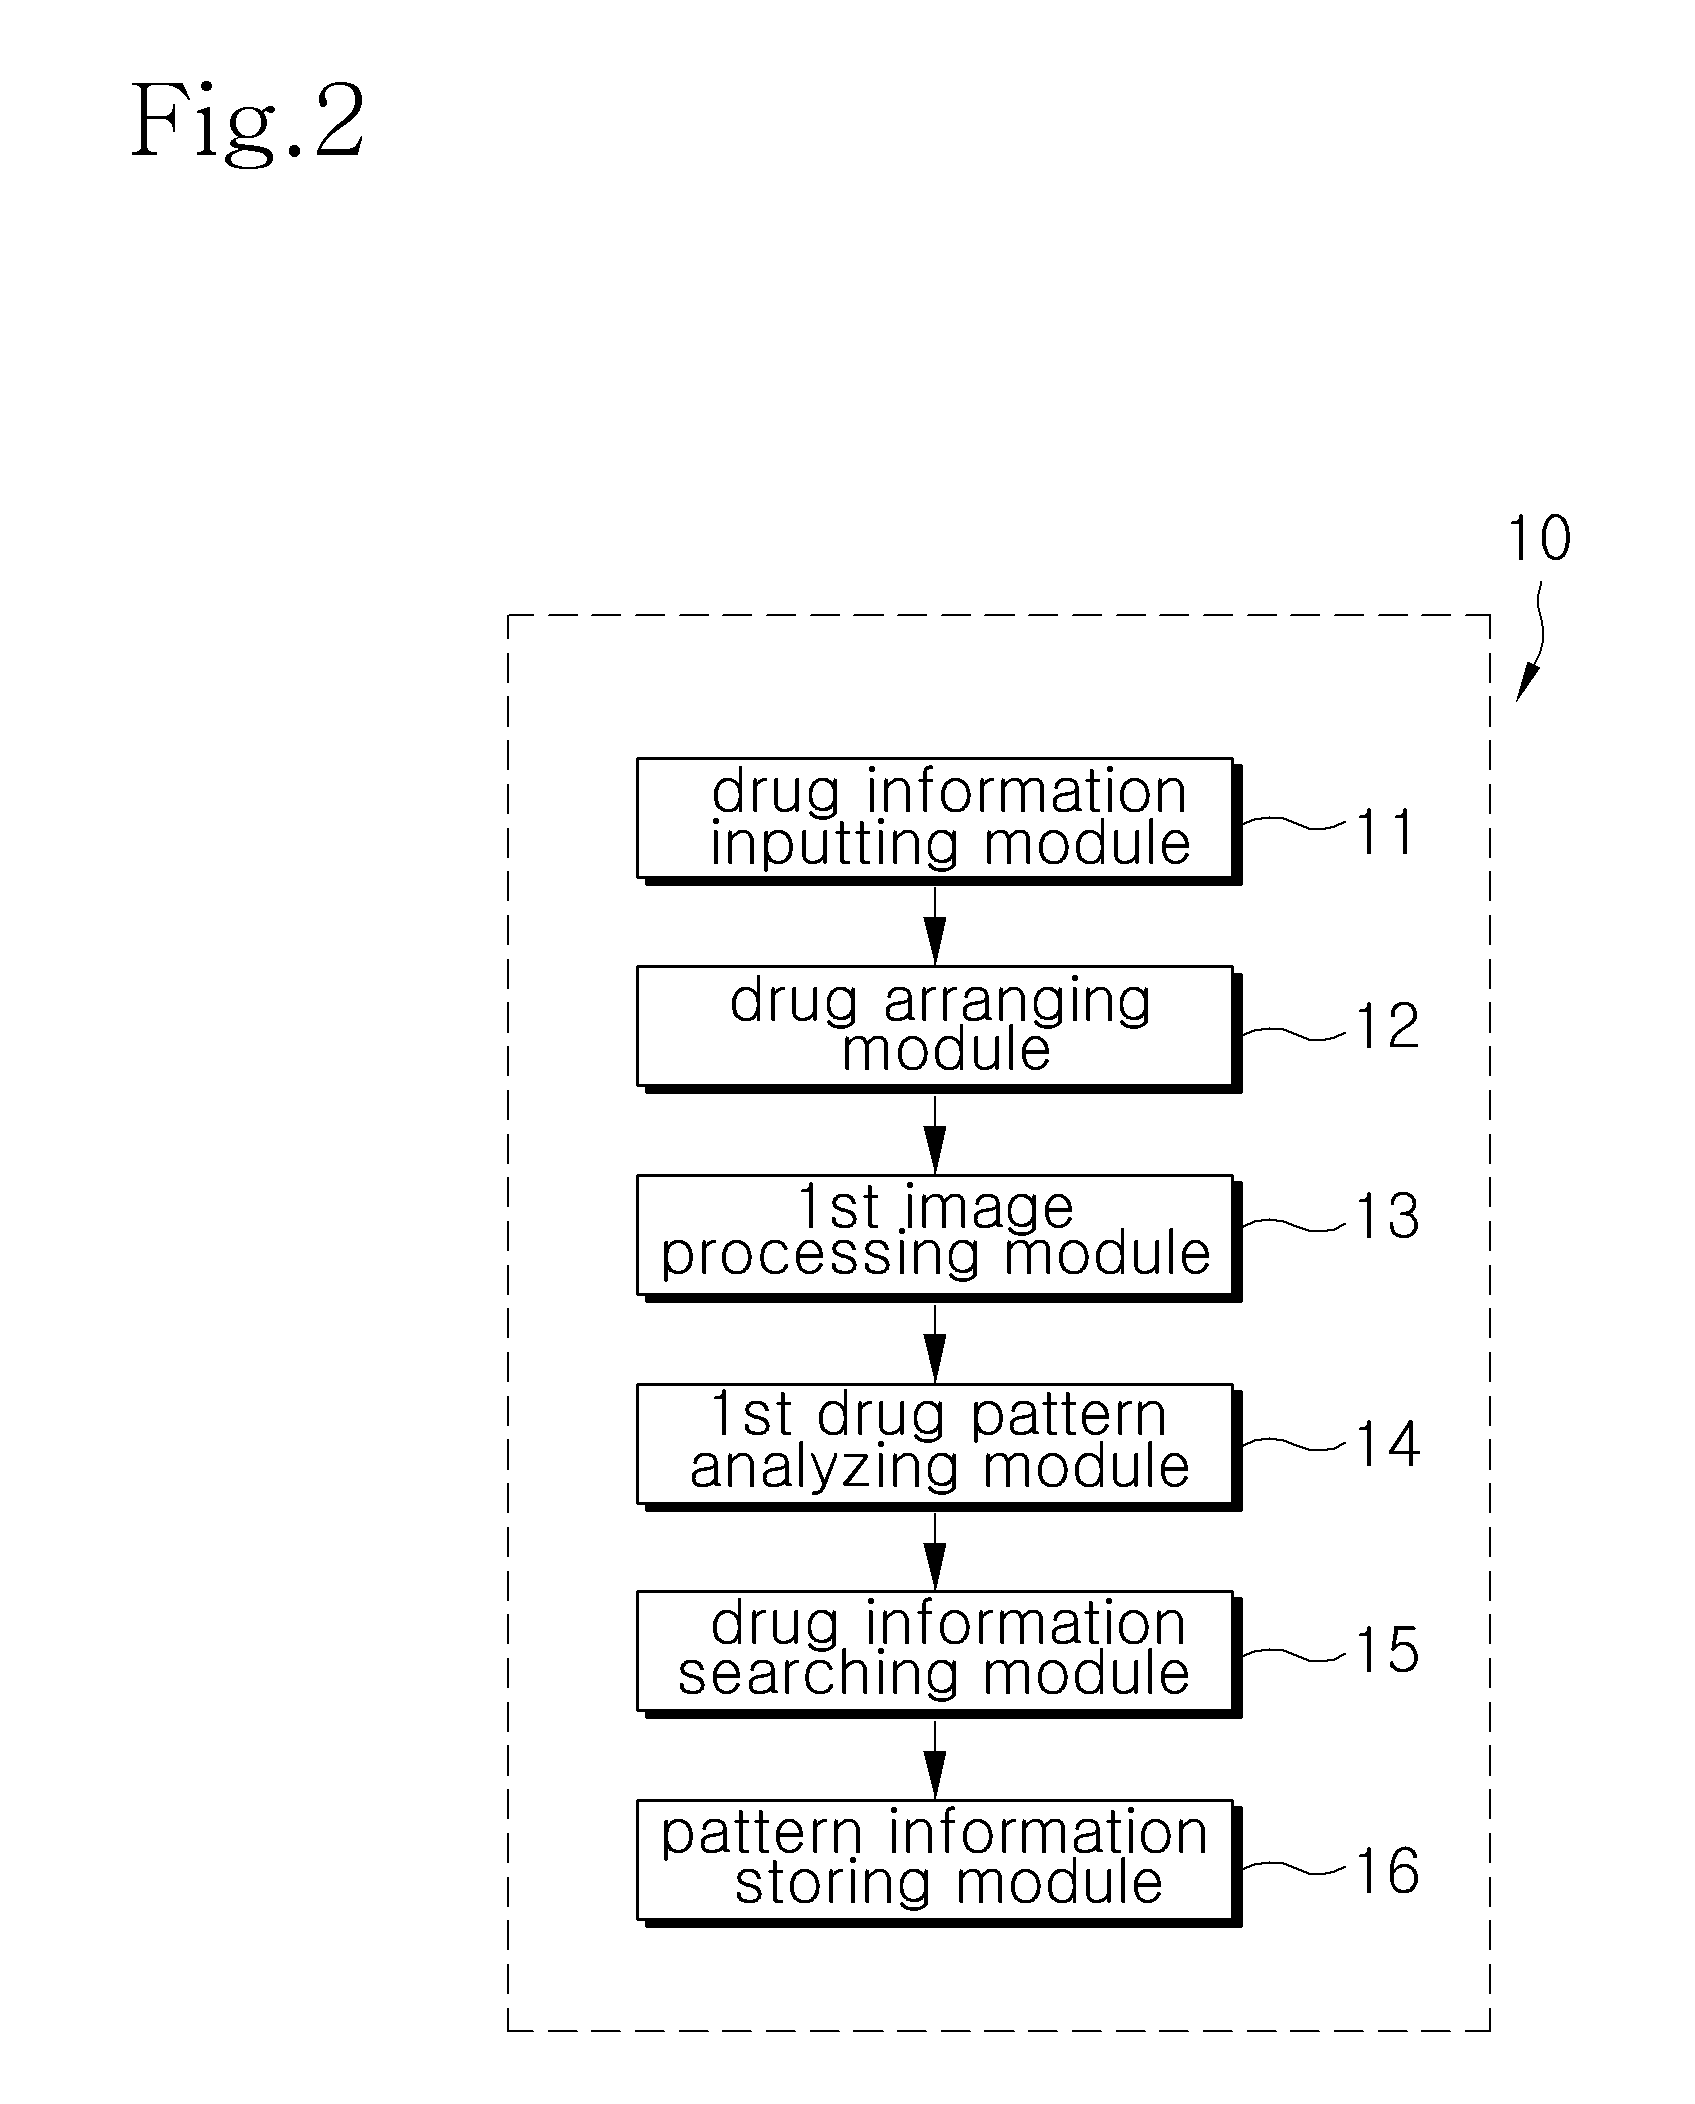 Integrated drug management system and method of providing prescription drugs by using the same